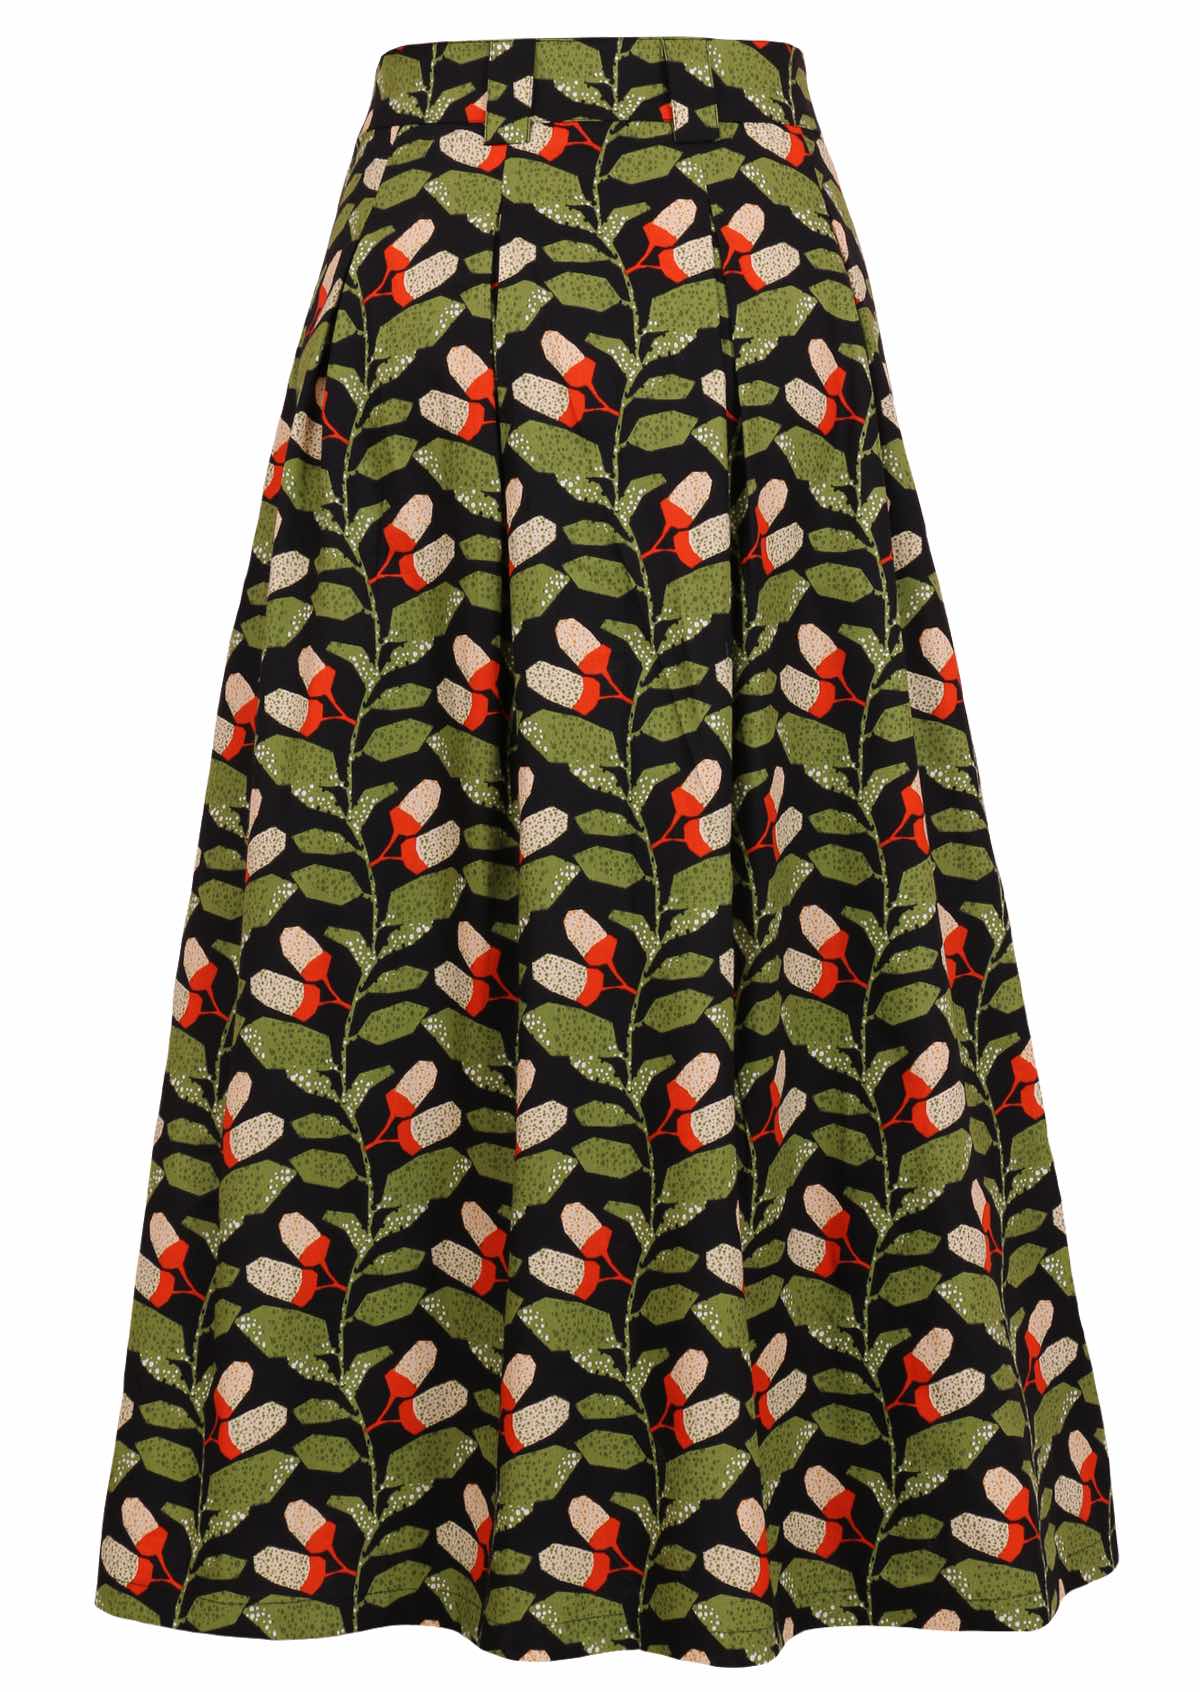 Cora Skirt Oak green and black print cotton mannequin back pic